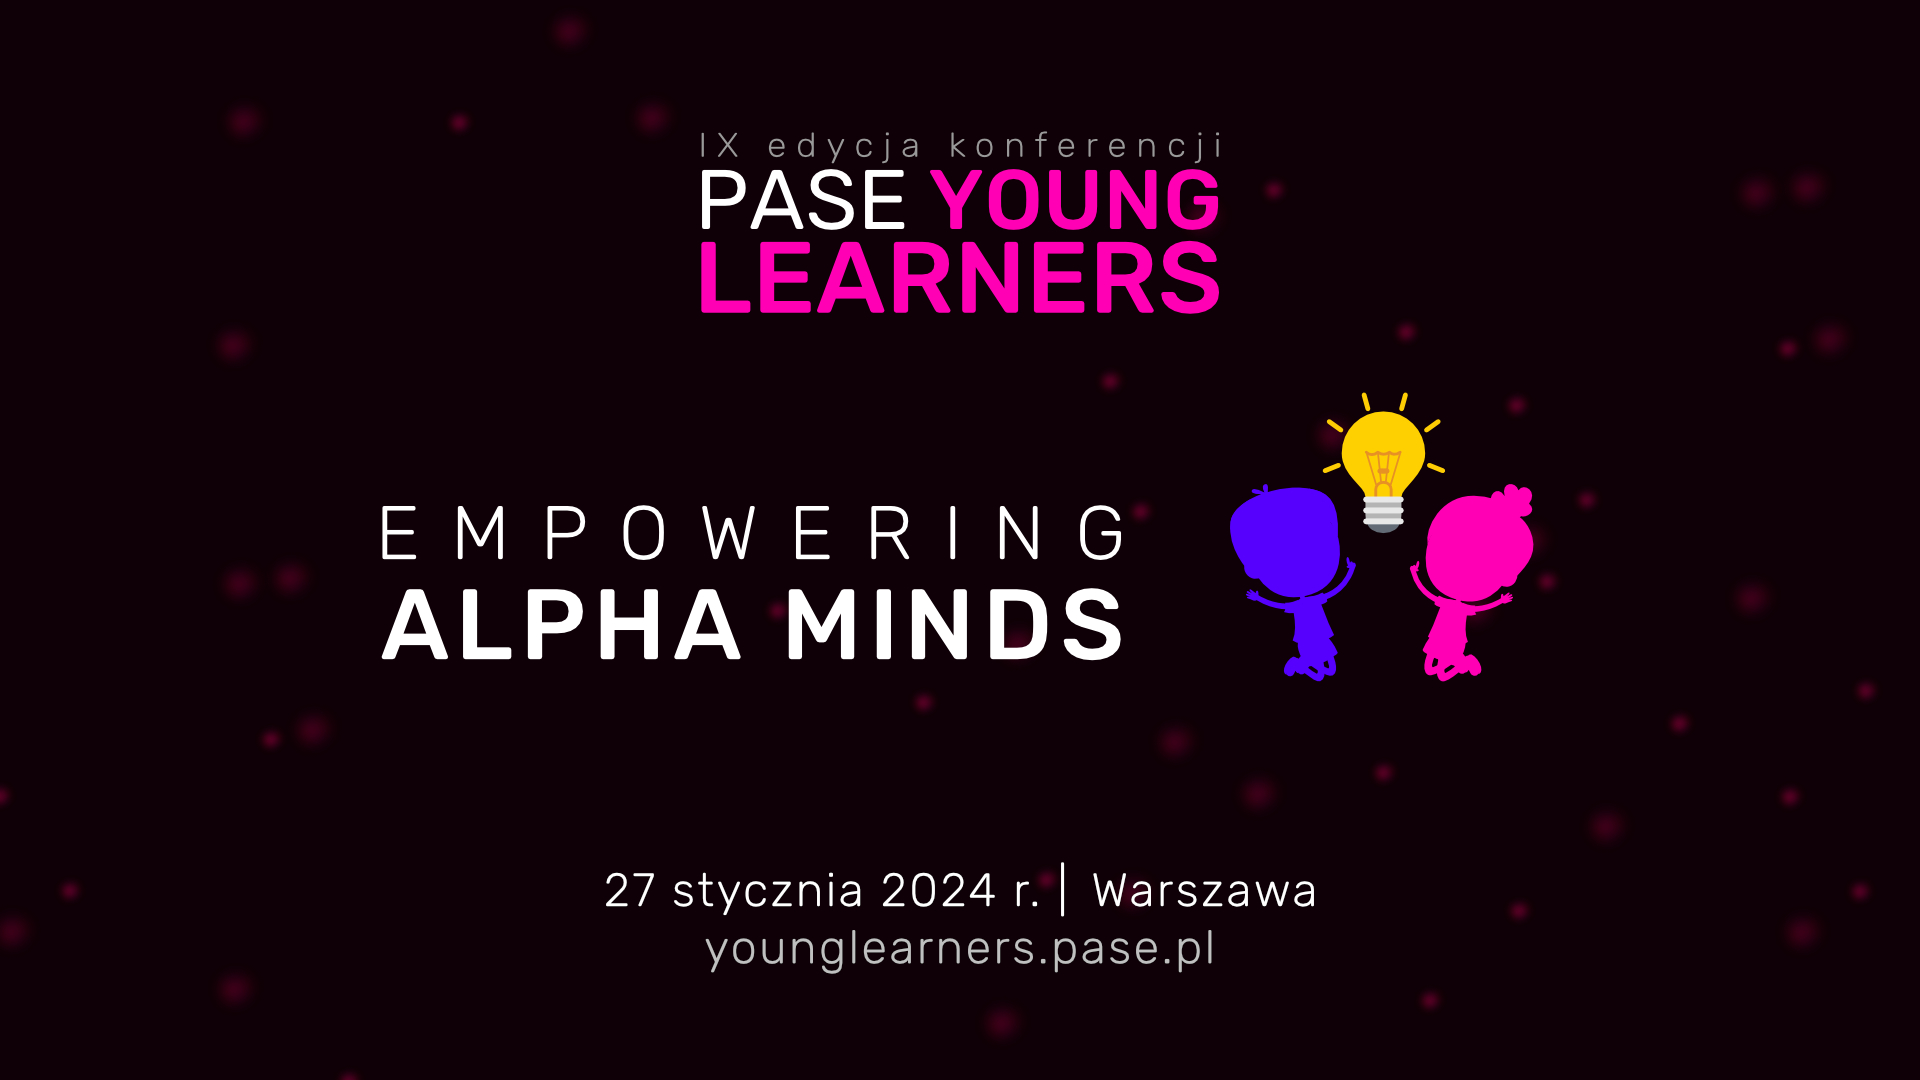 Konferencja PASE Young Learners: Empowering Alpha Minds - 27 stycznia 2024 r.